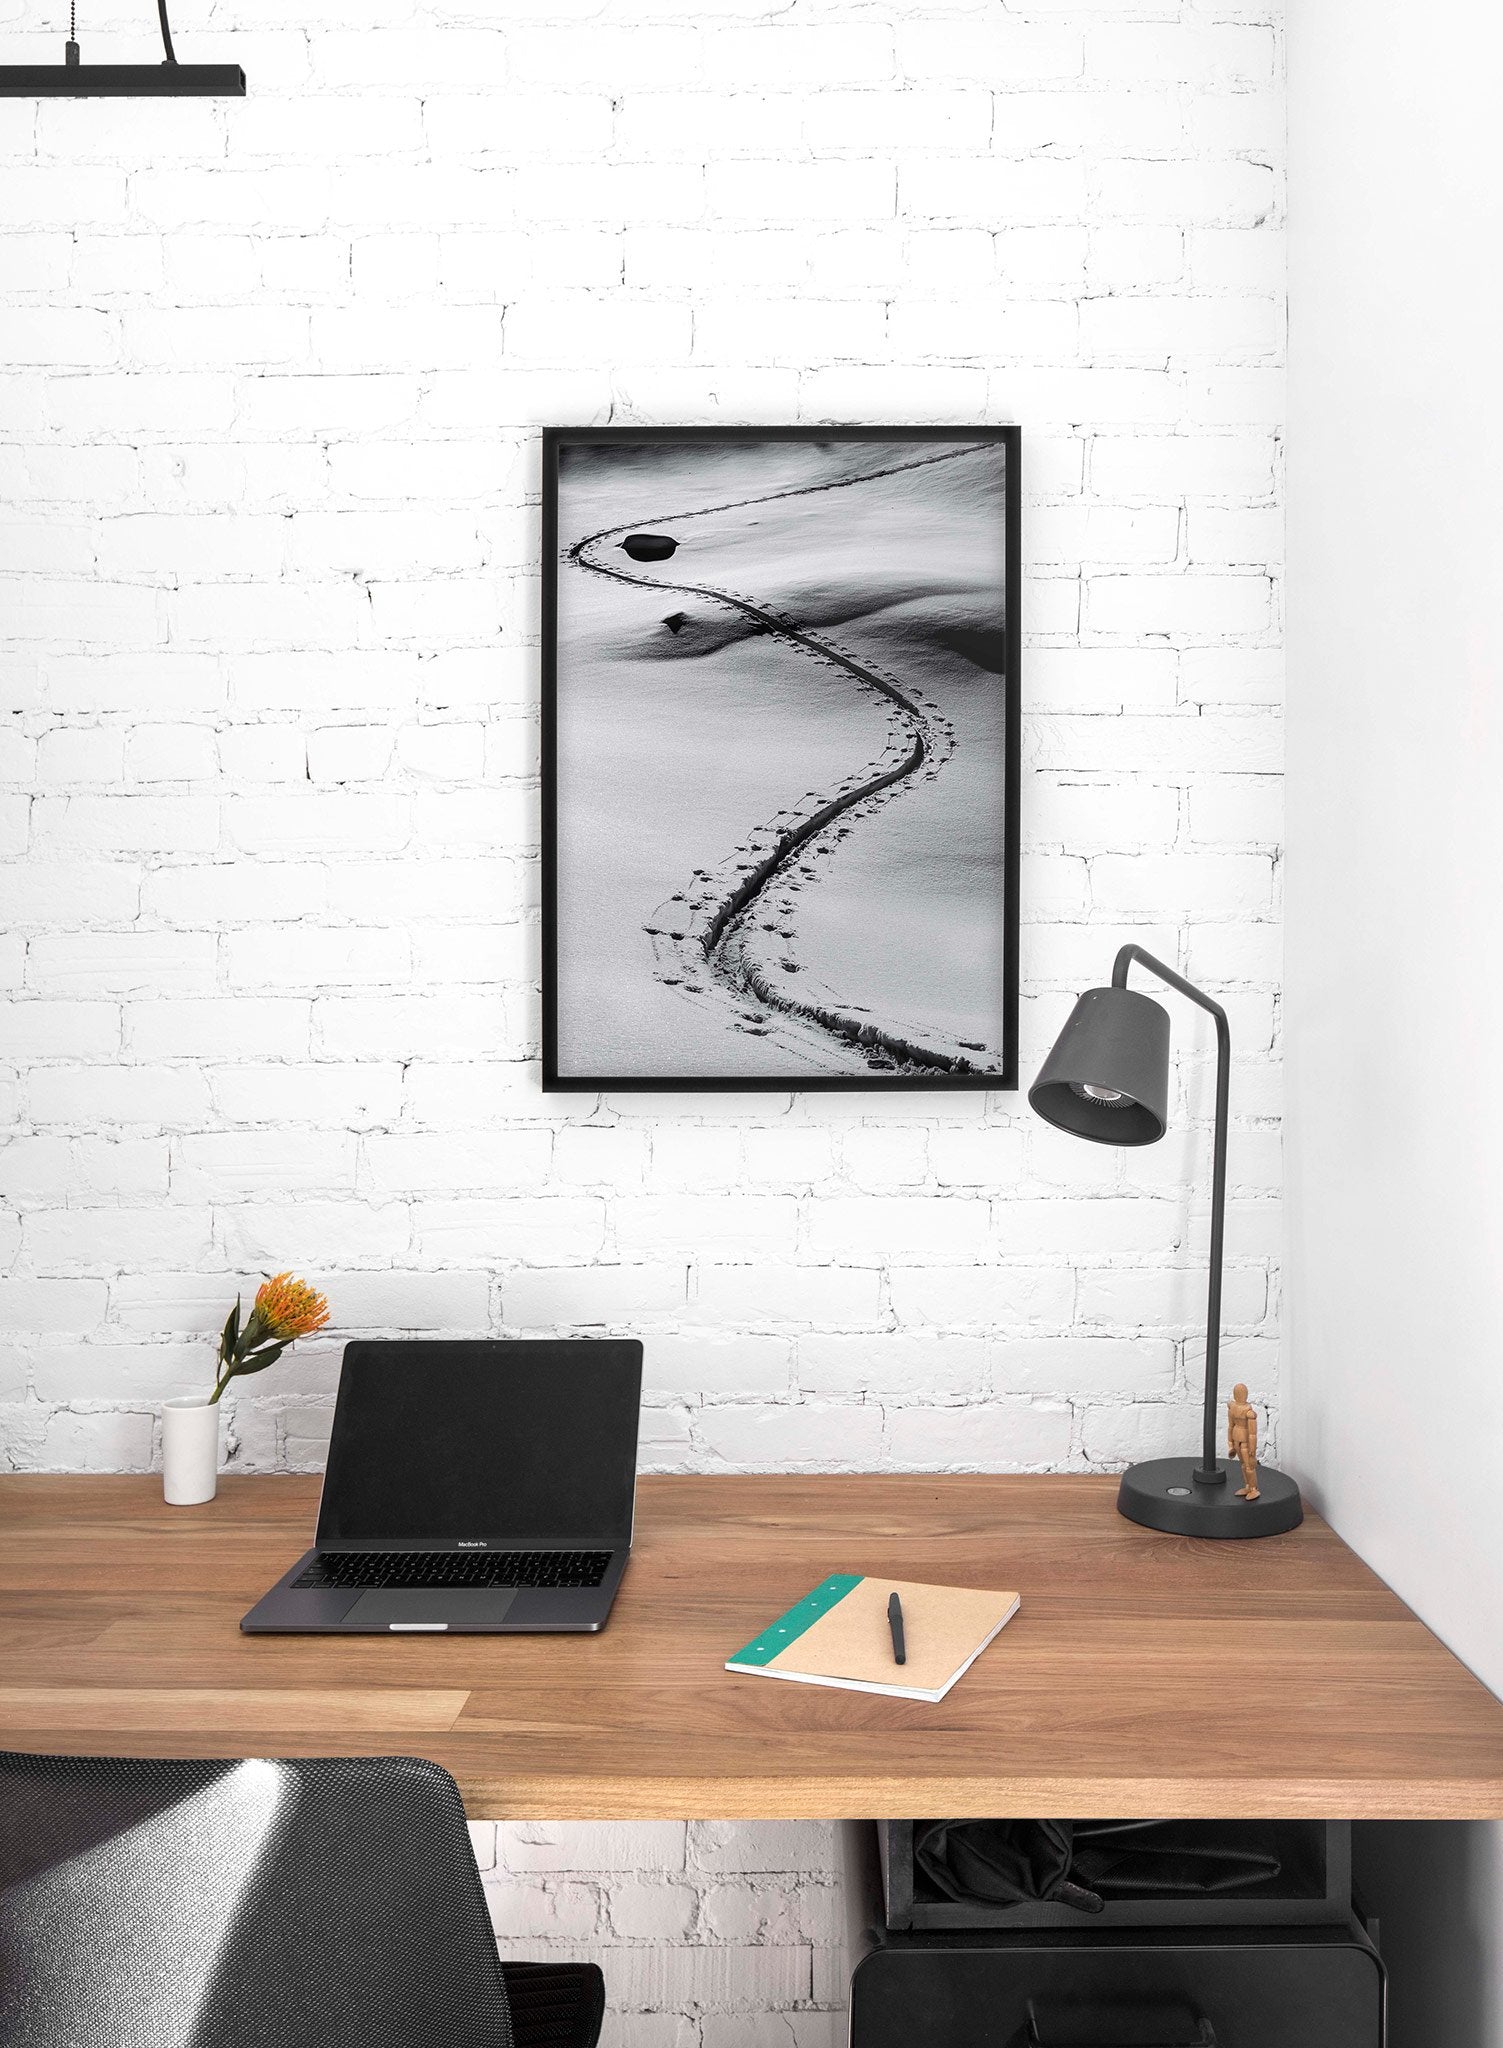 Landscape photography poster by Opposite Wall with footprint trail in the snow - Lifestyle - Office Desk